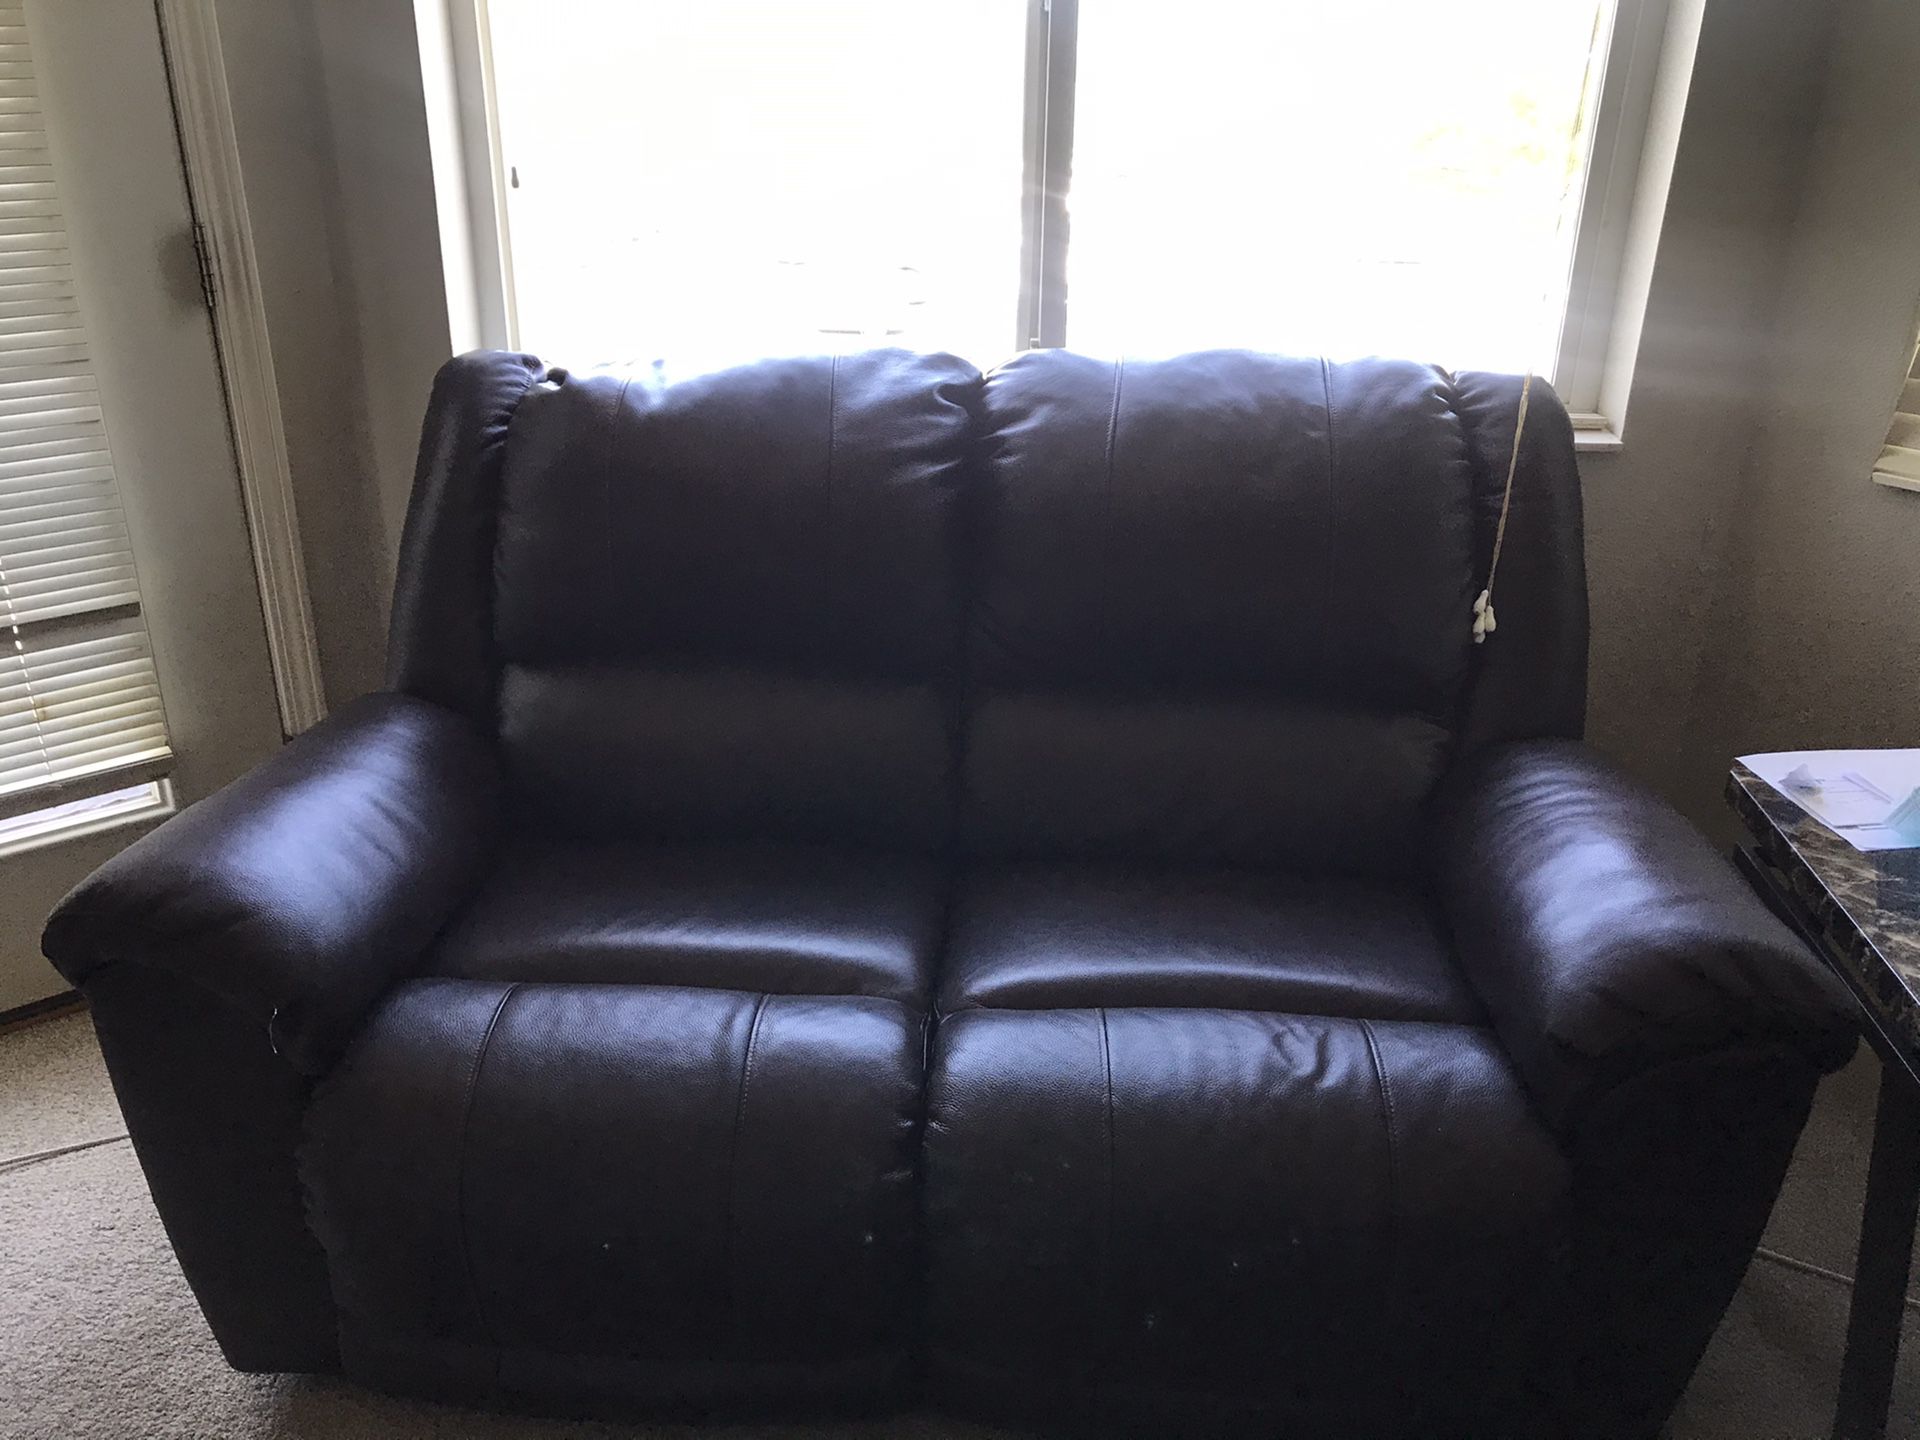 Ashley’s Furniture - 2 seater recliner sofa